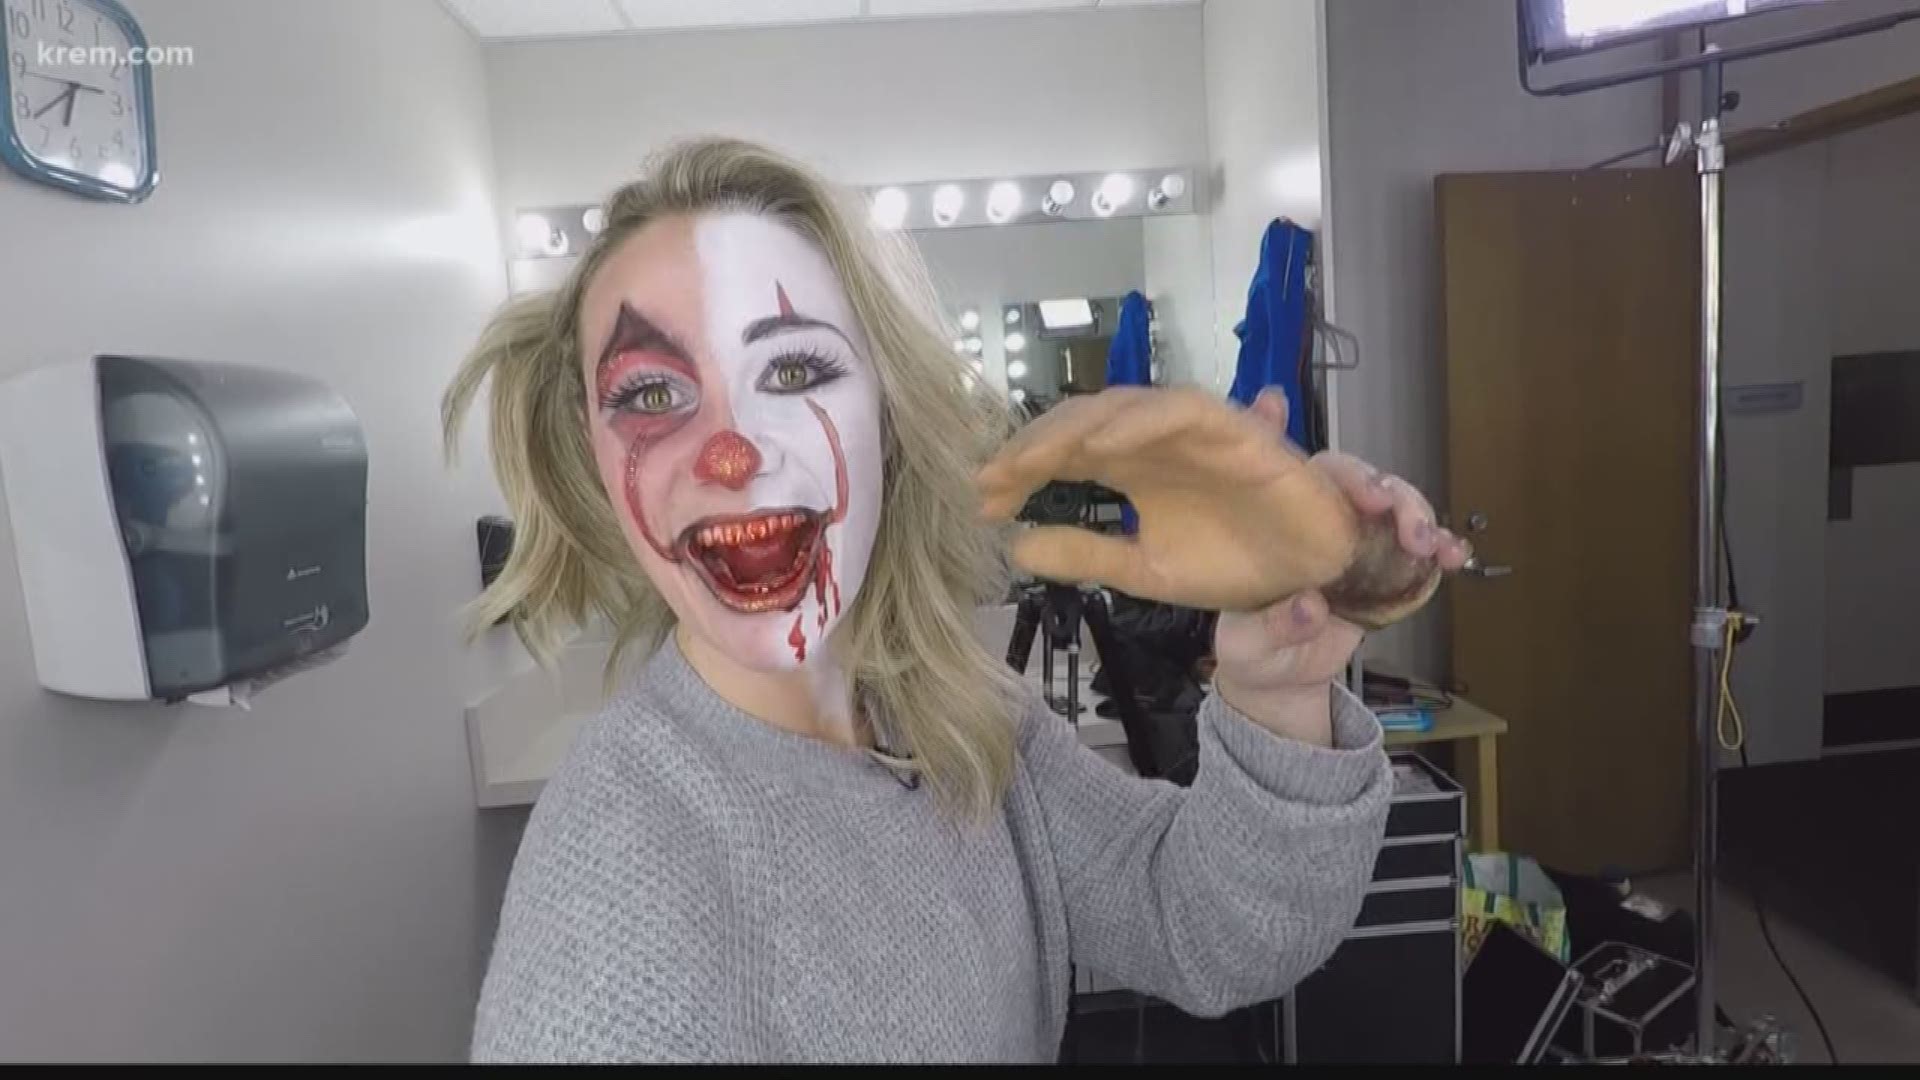 A local makeup artist shows us how to make a DIY Halloween costume look professional.